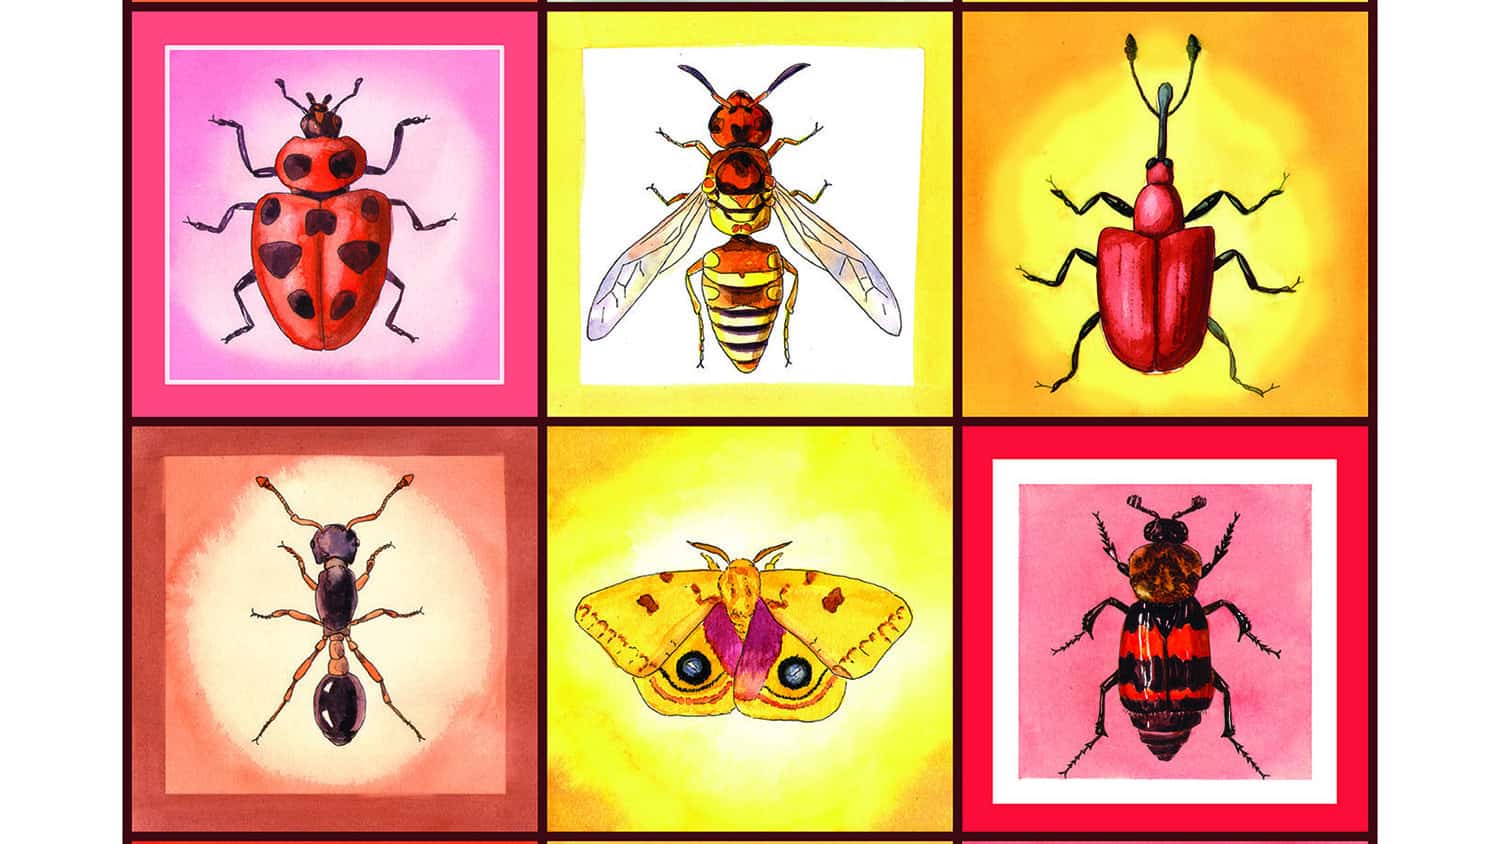 Illustrations of six different types of insects